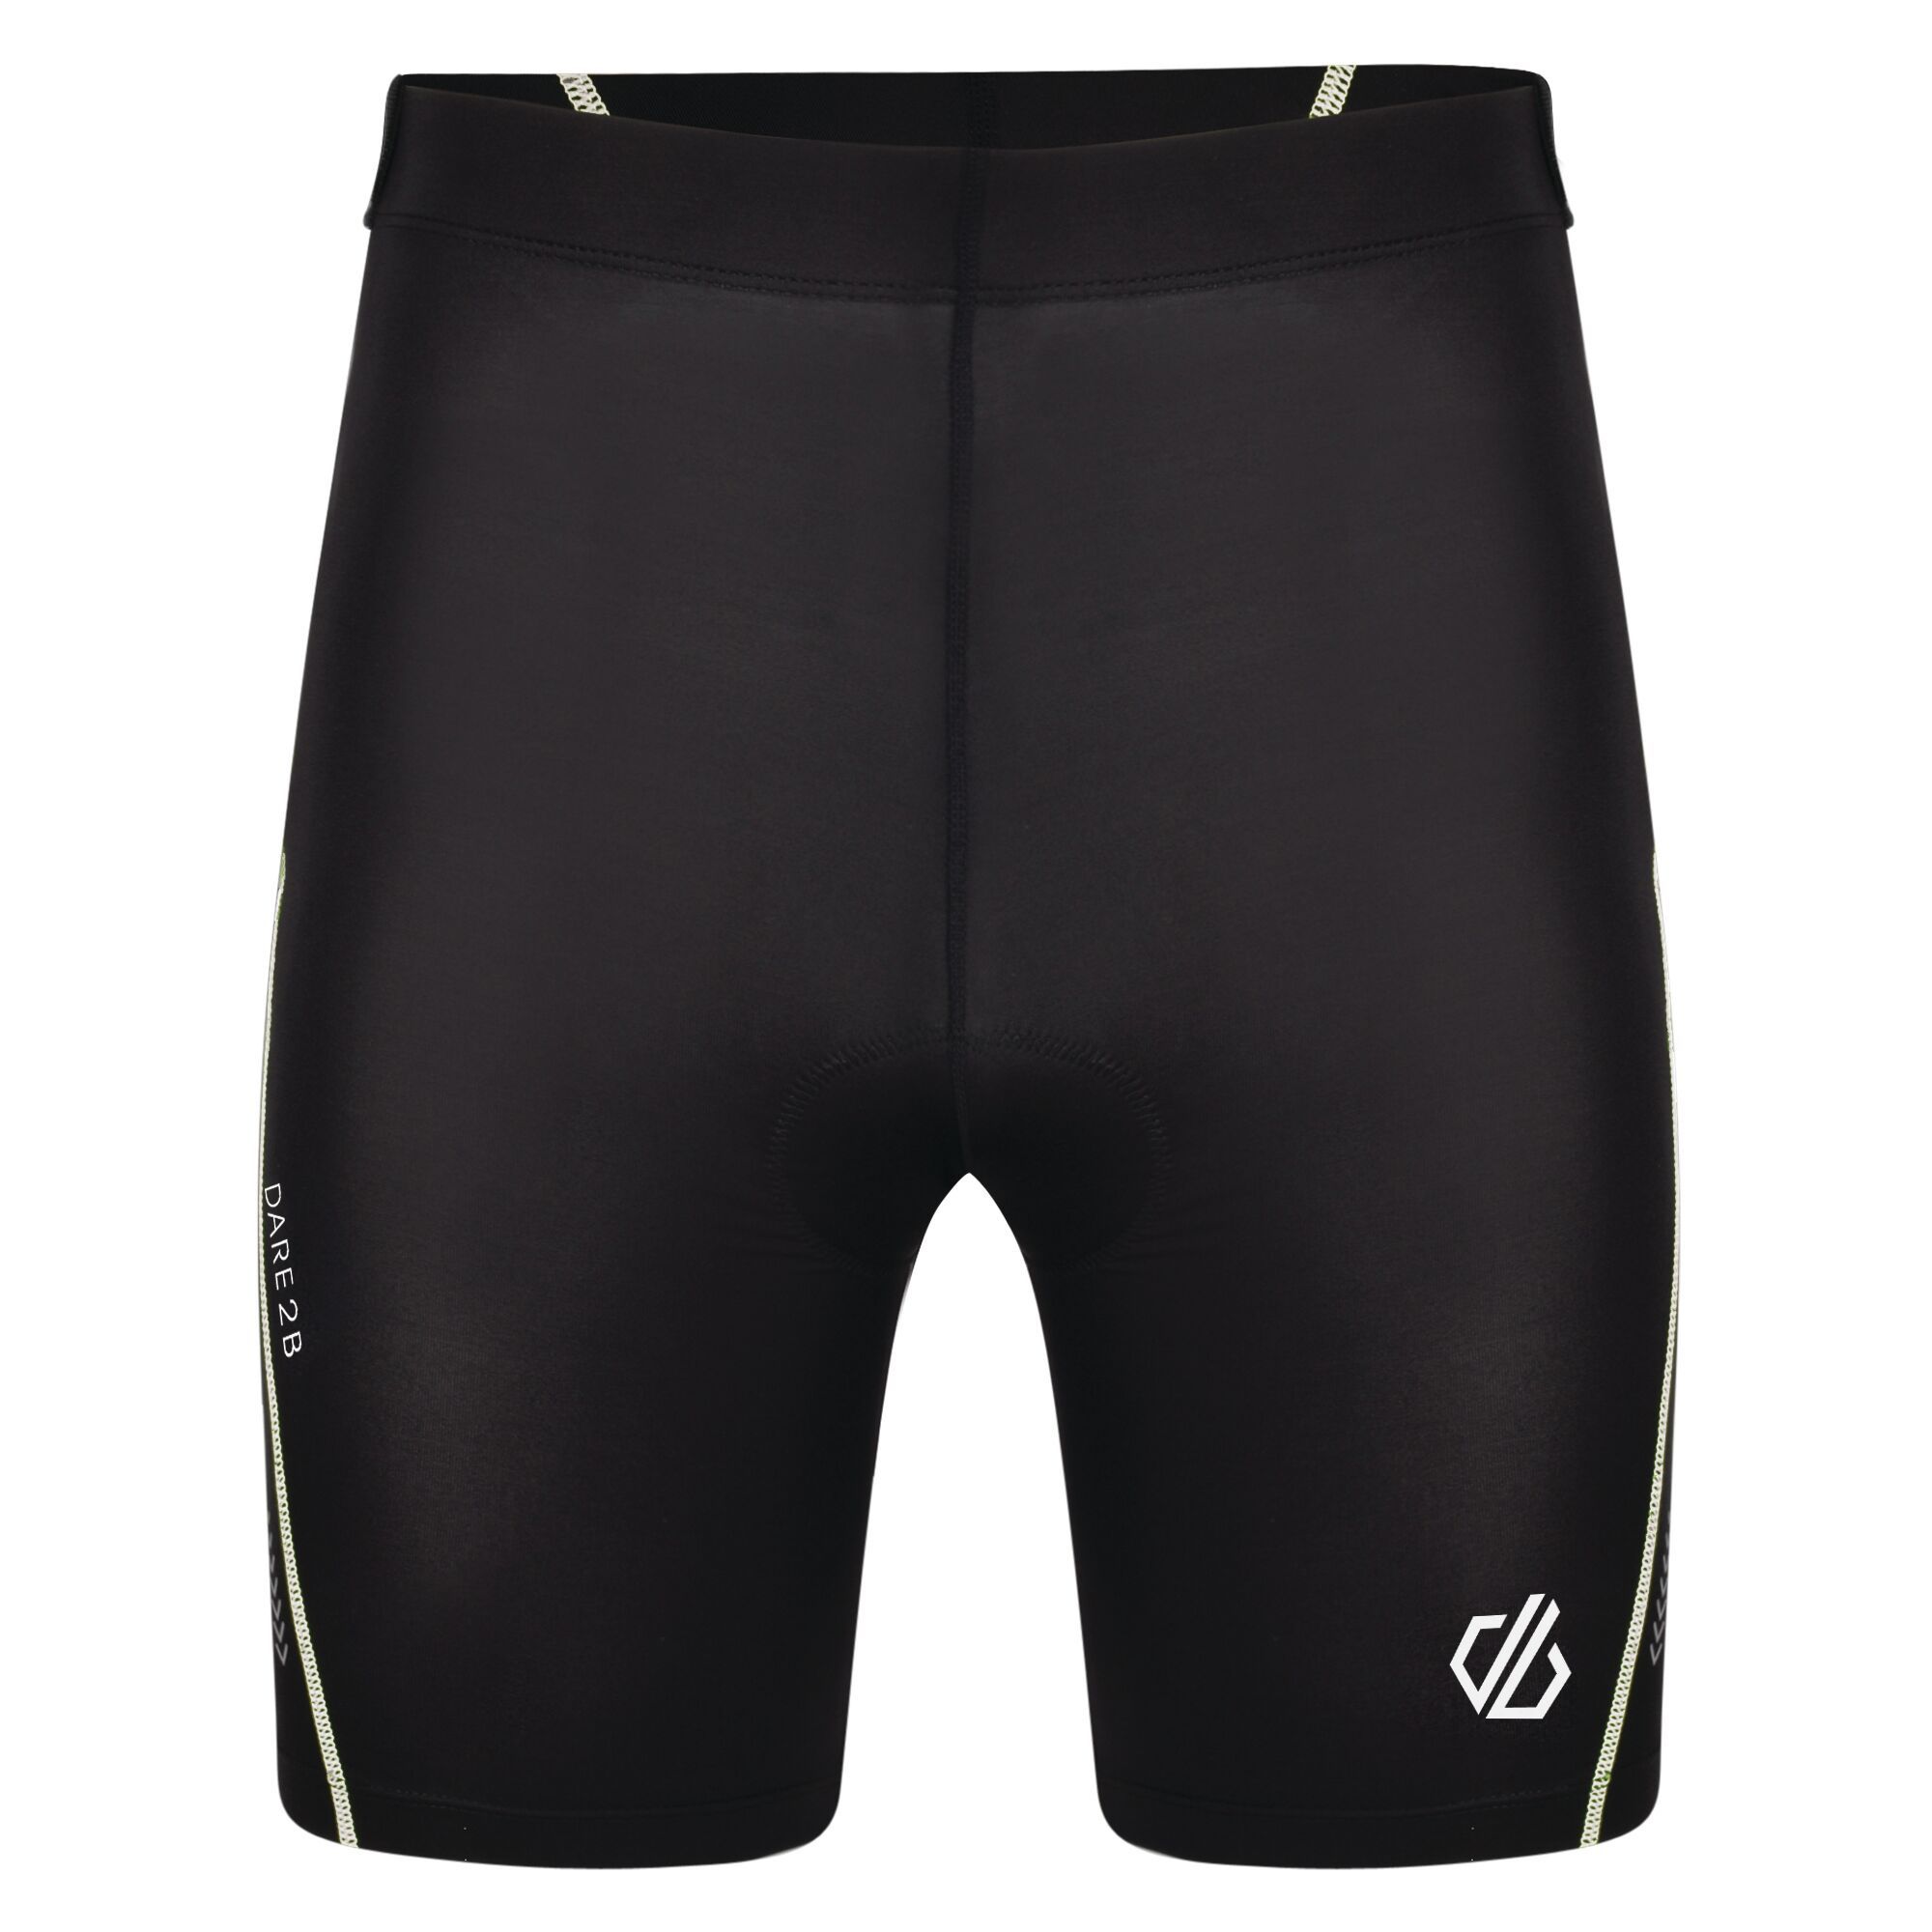 Material: elastane: 12%, polyester: 88%. Q-Wic lightweight polyester/elastane fabric. Quick drying. Flat locked seams for comfort. Interactive attachment loop at waistband. 2D moulded stretch multi density foam insert. Coolmax moisture control and  treatment to insert. Reflective detail for enhanced visibility.